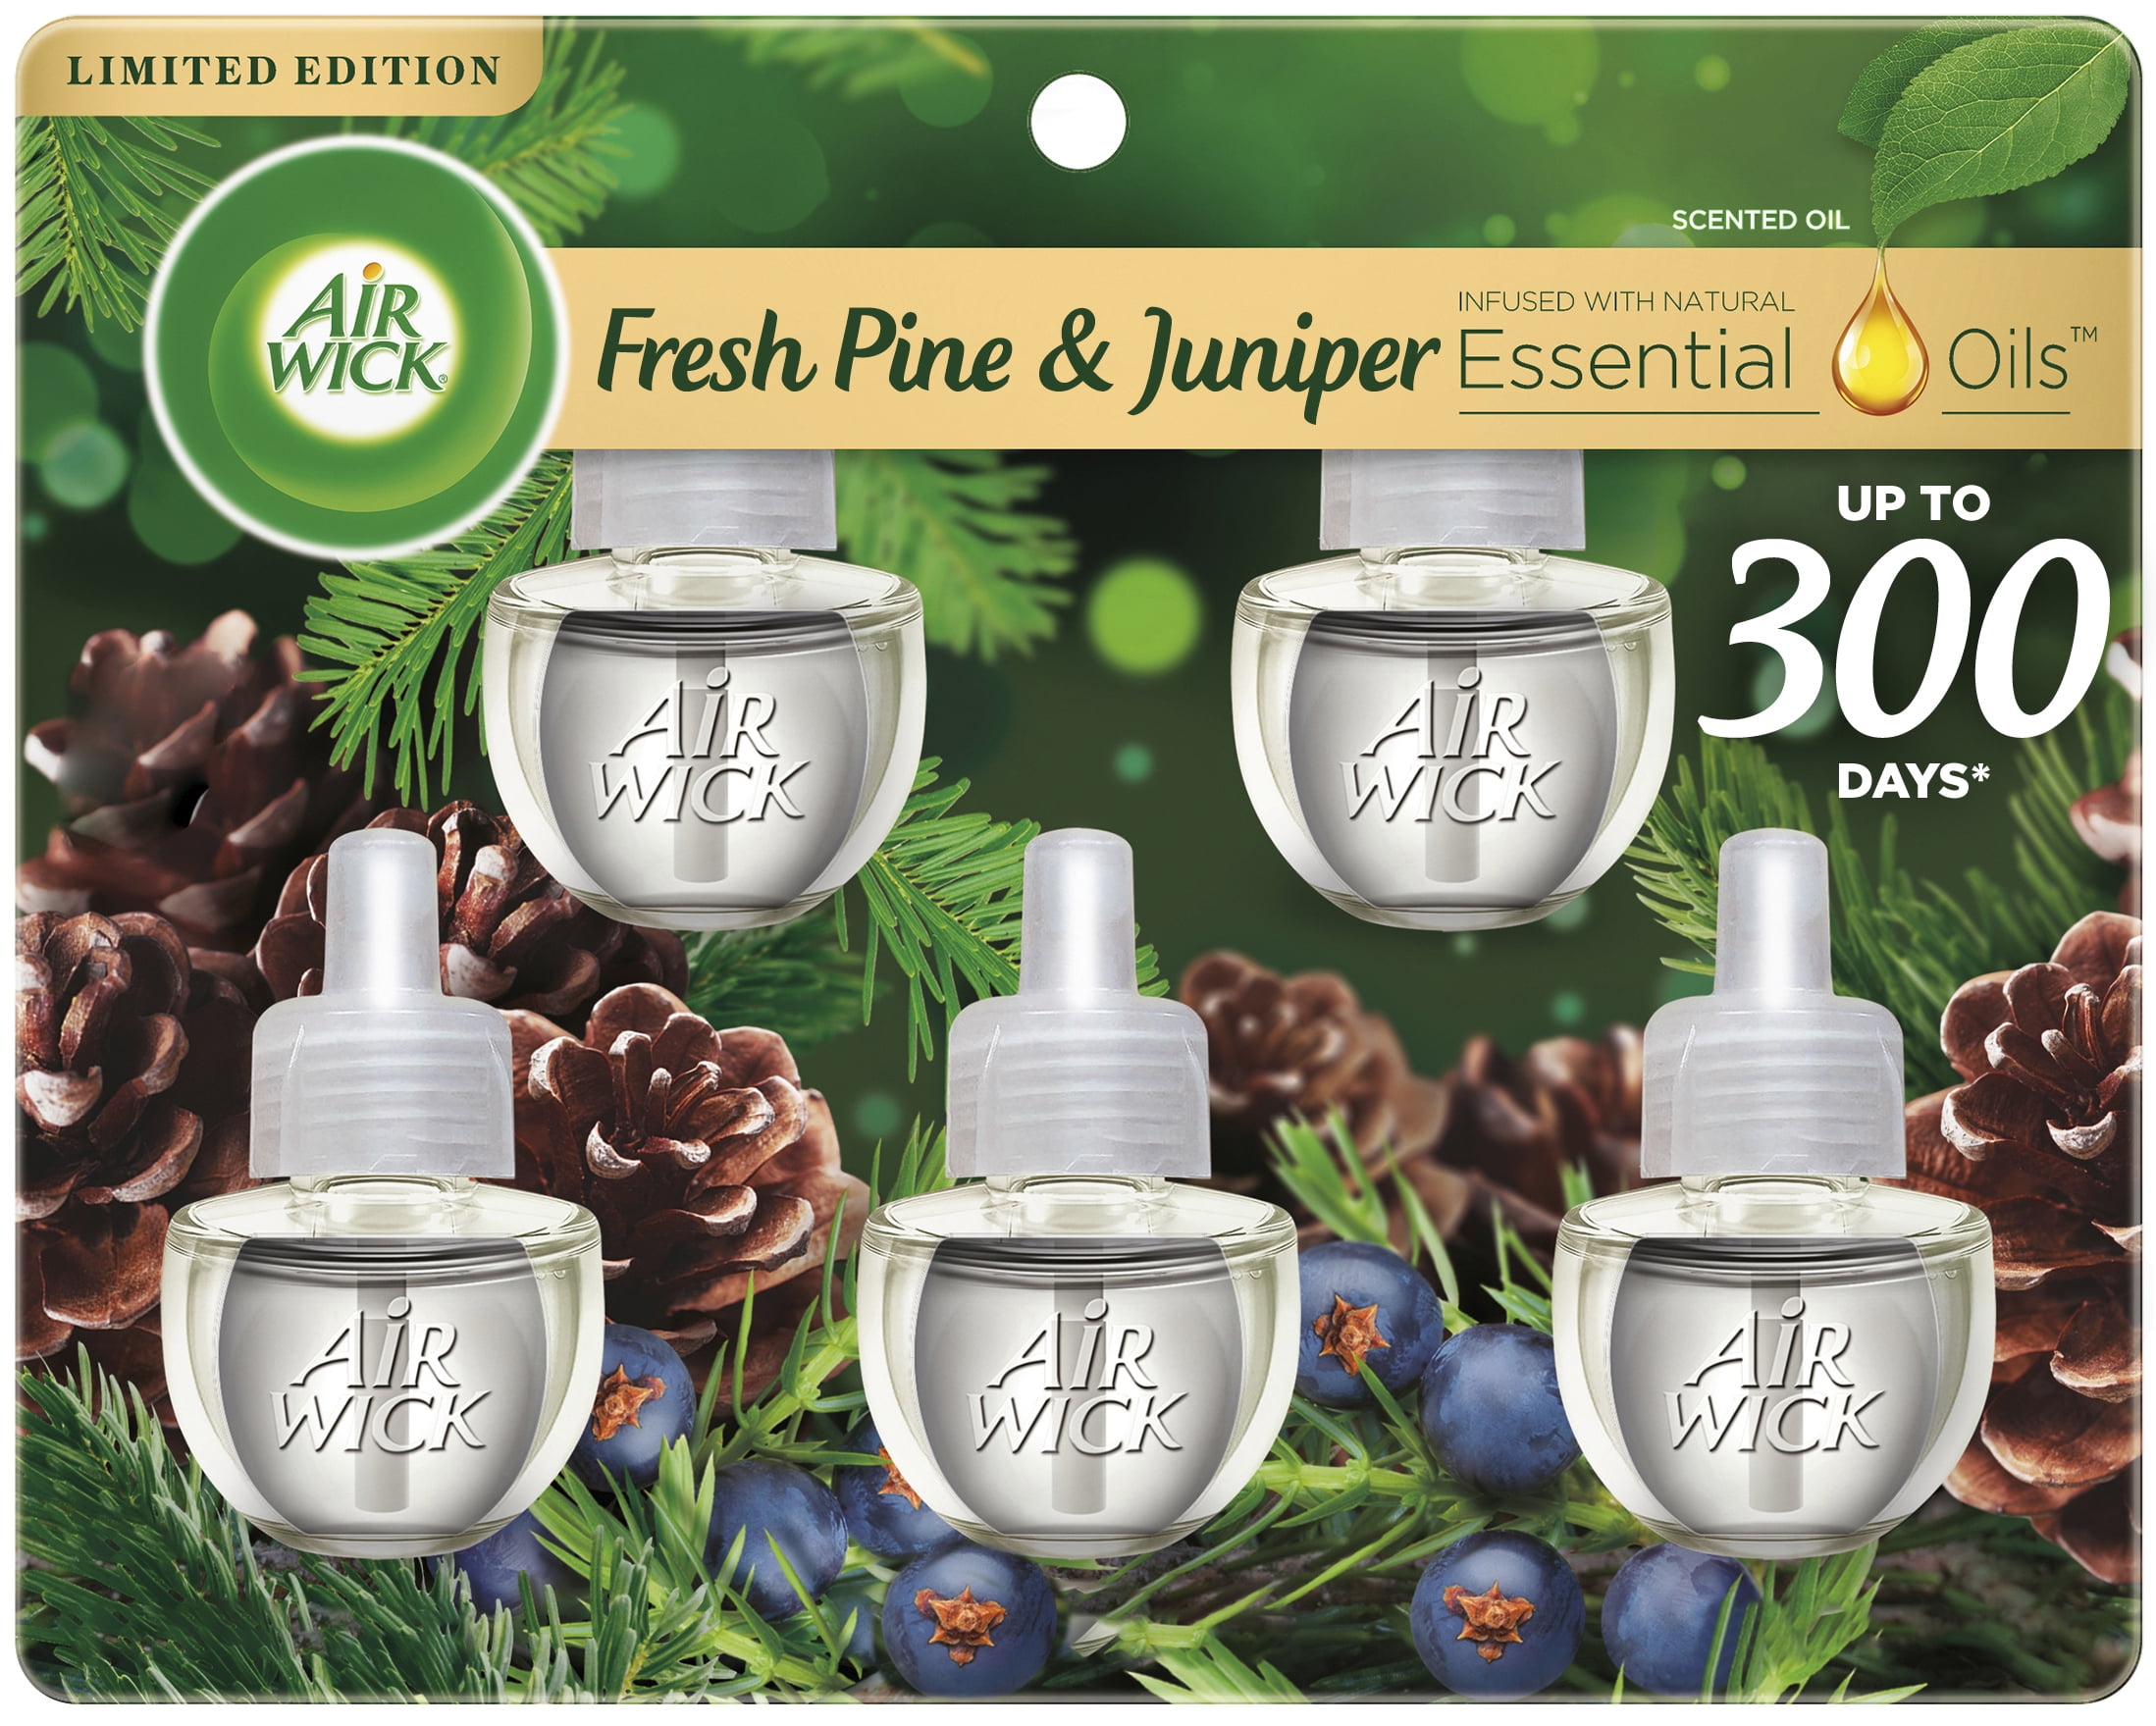 Air Wick Plug in Scented Oil Refill, 5 ct, Fresh Pine and Juniper, Air Freshener, Essential Oils, Fall Scent, Fall decor